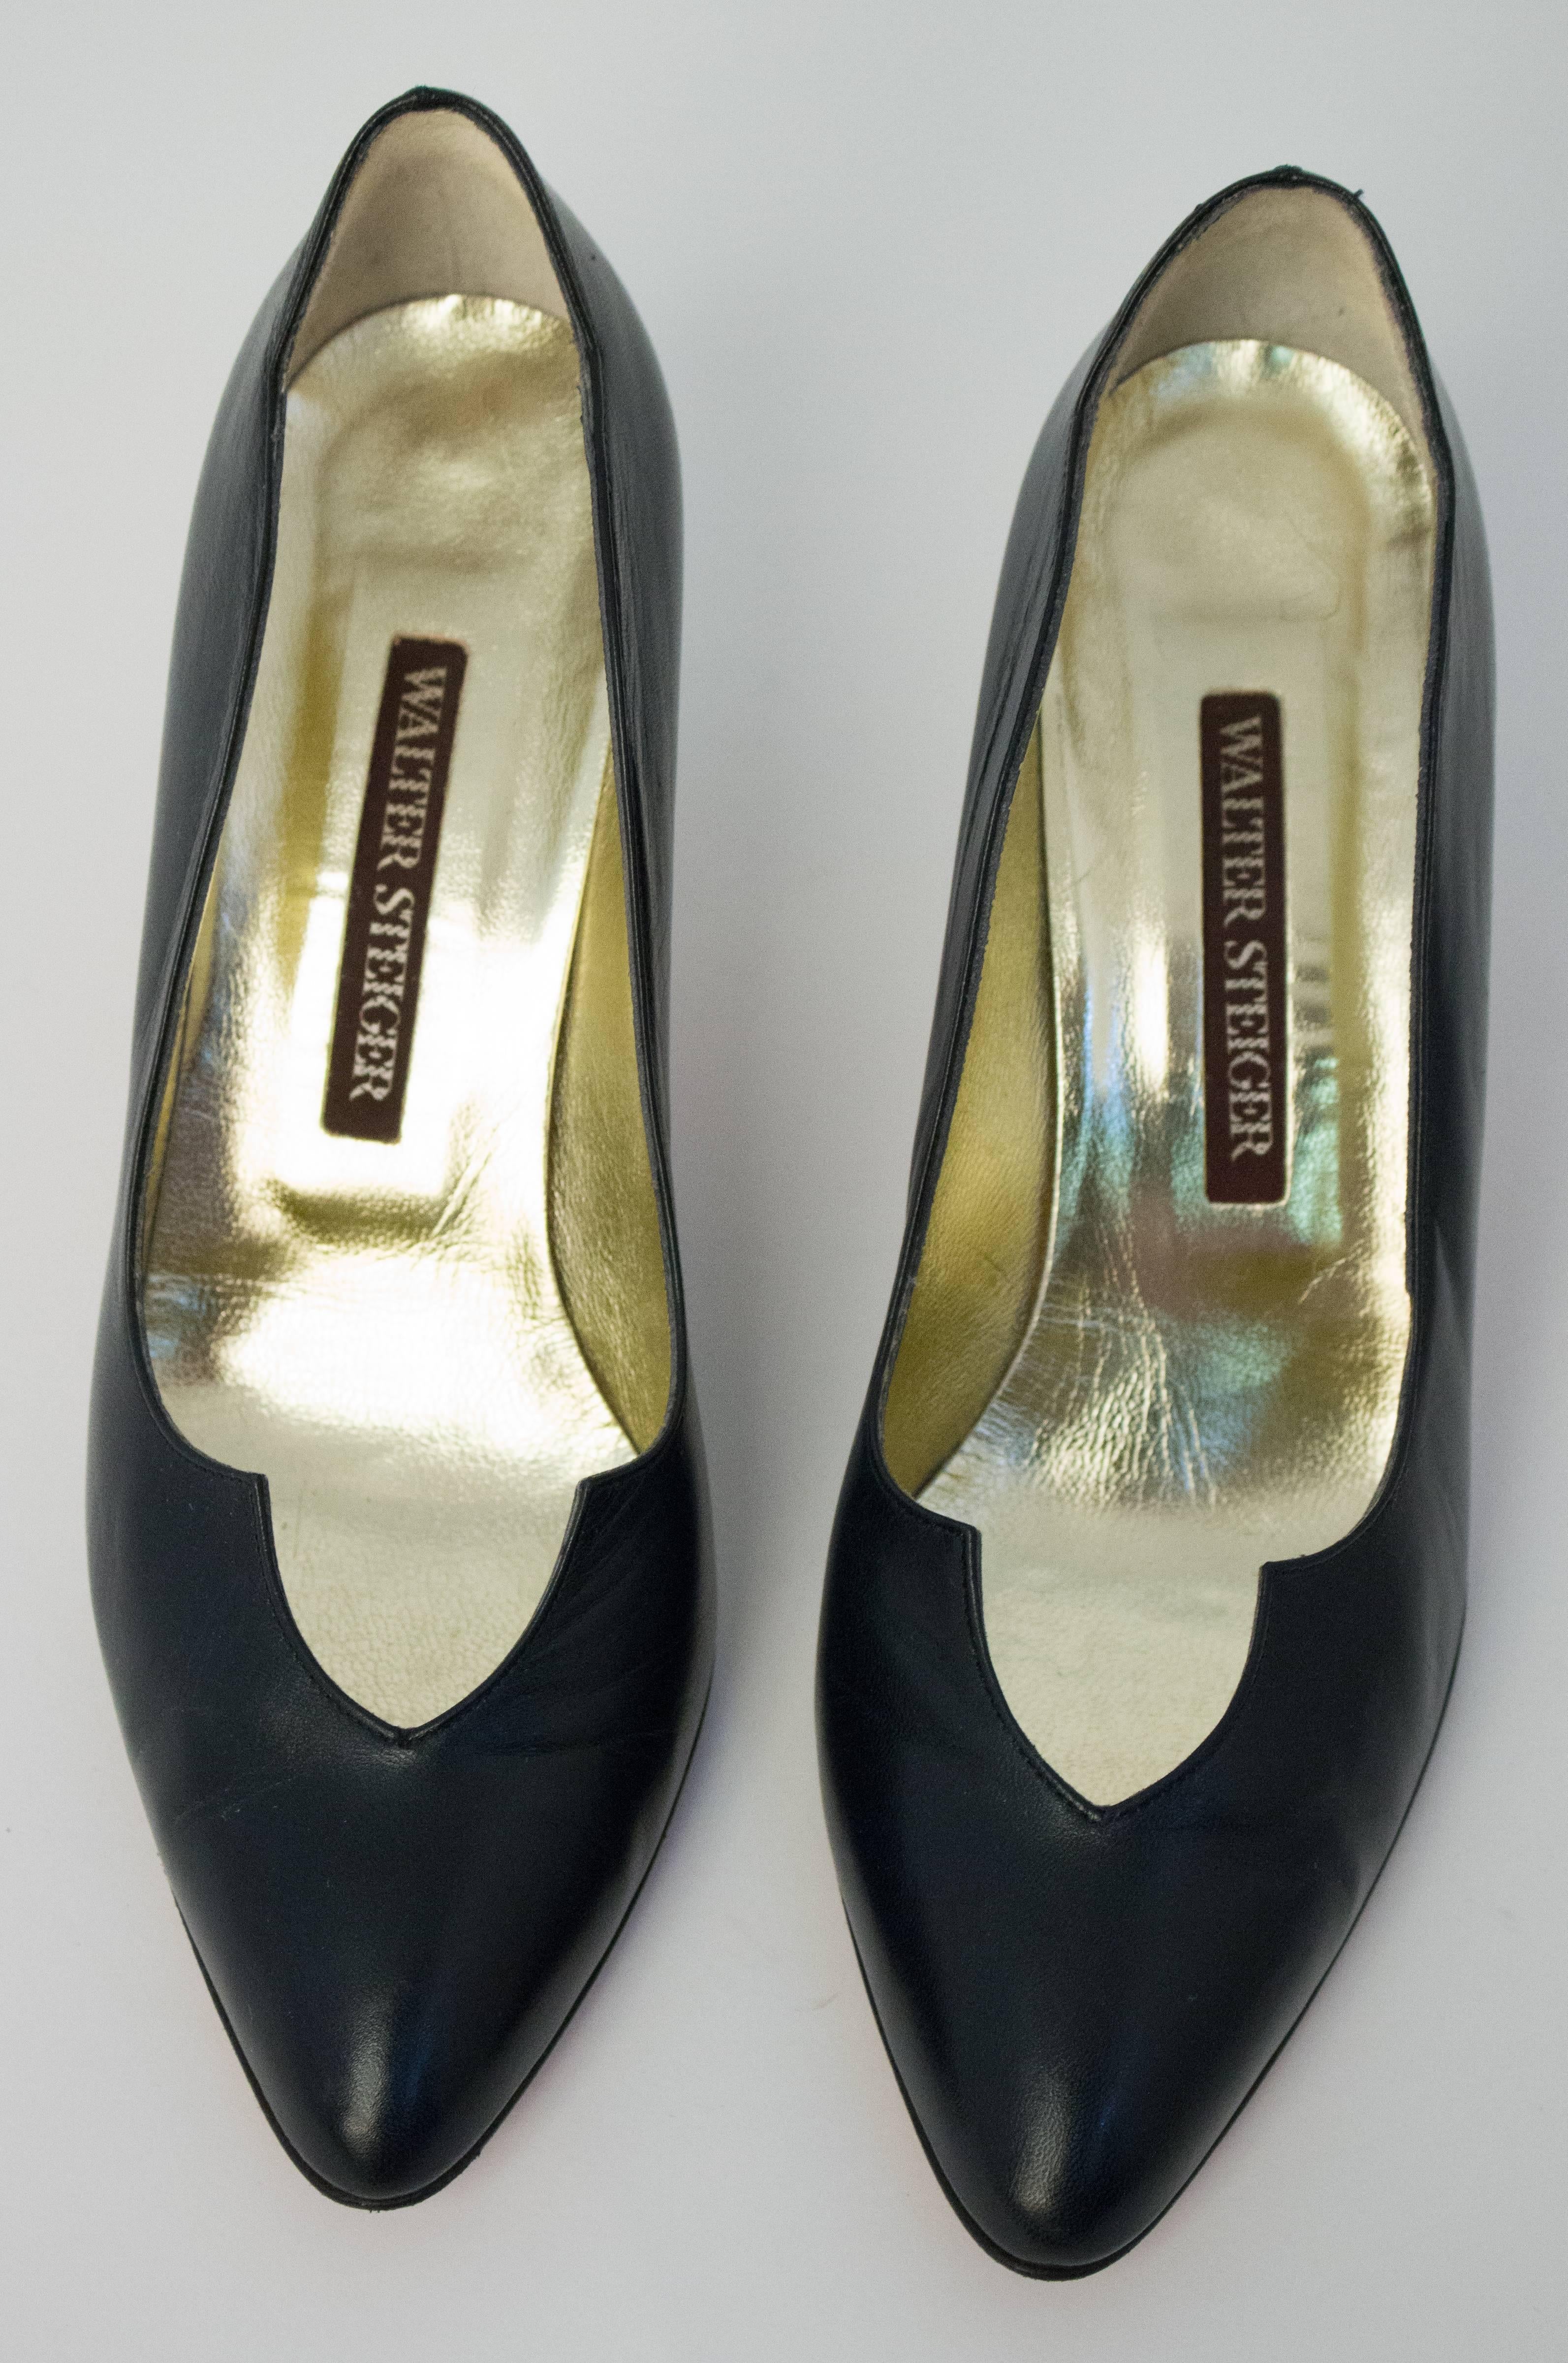 80s Walter Steiger Black Pumps. Handmade in Italy. Marked 8B. Some wrinkles visible on front vamp.